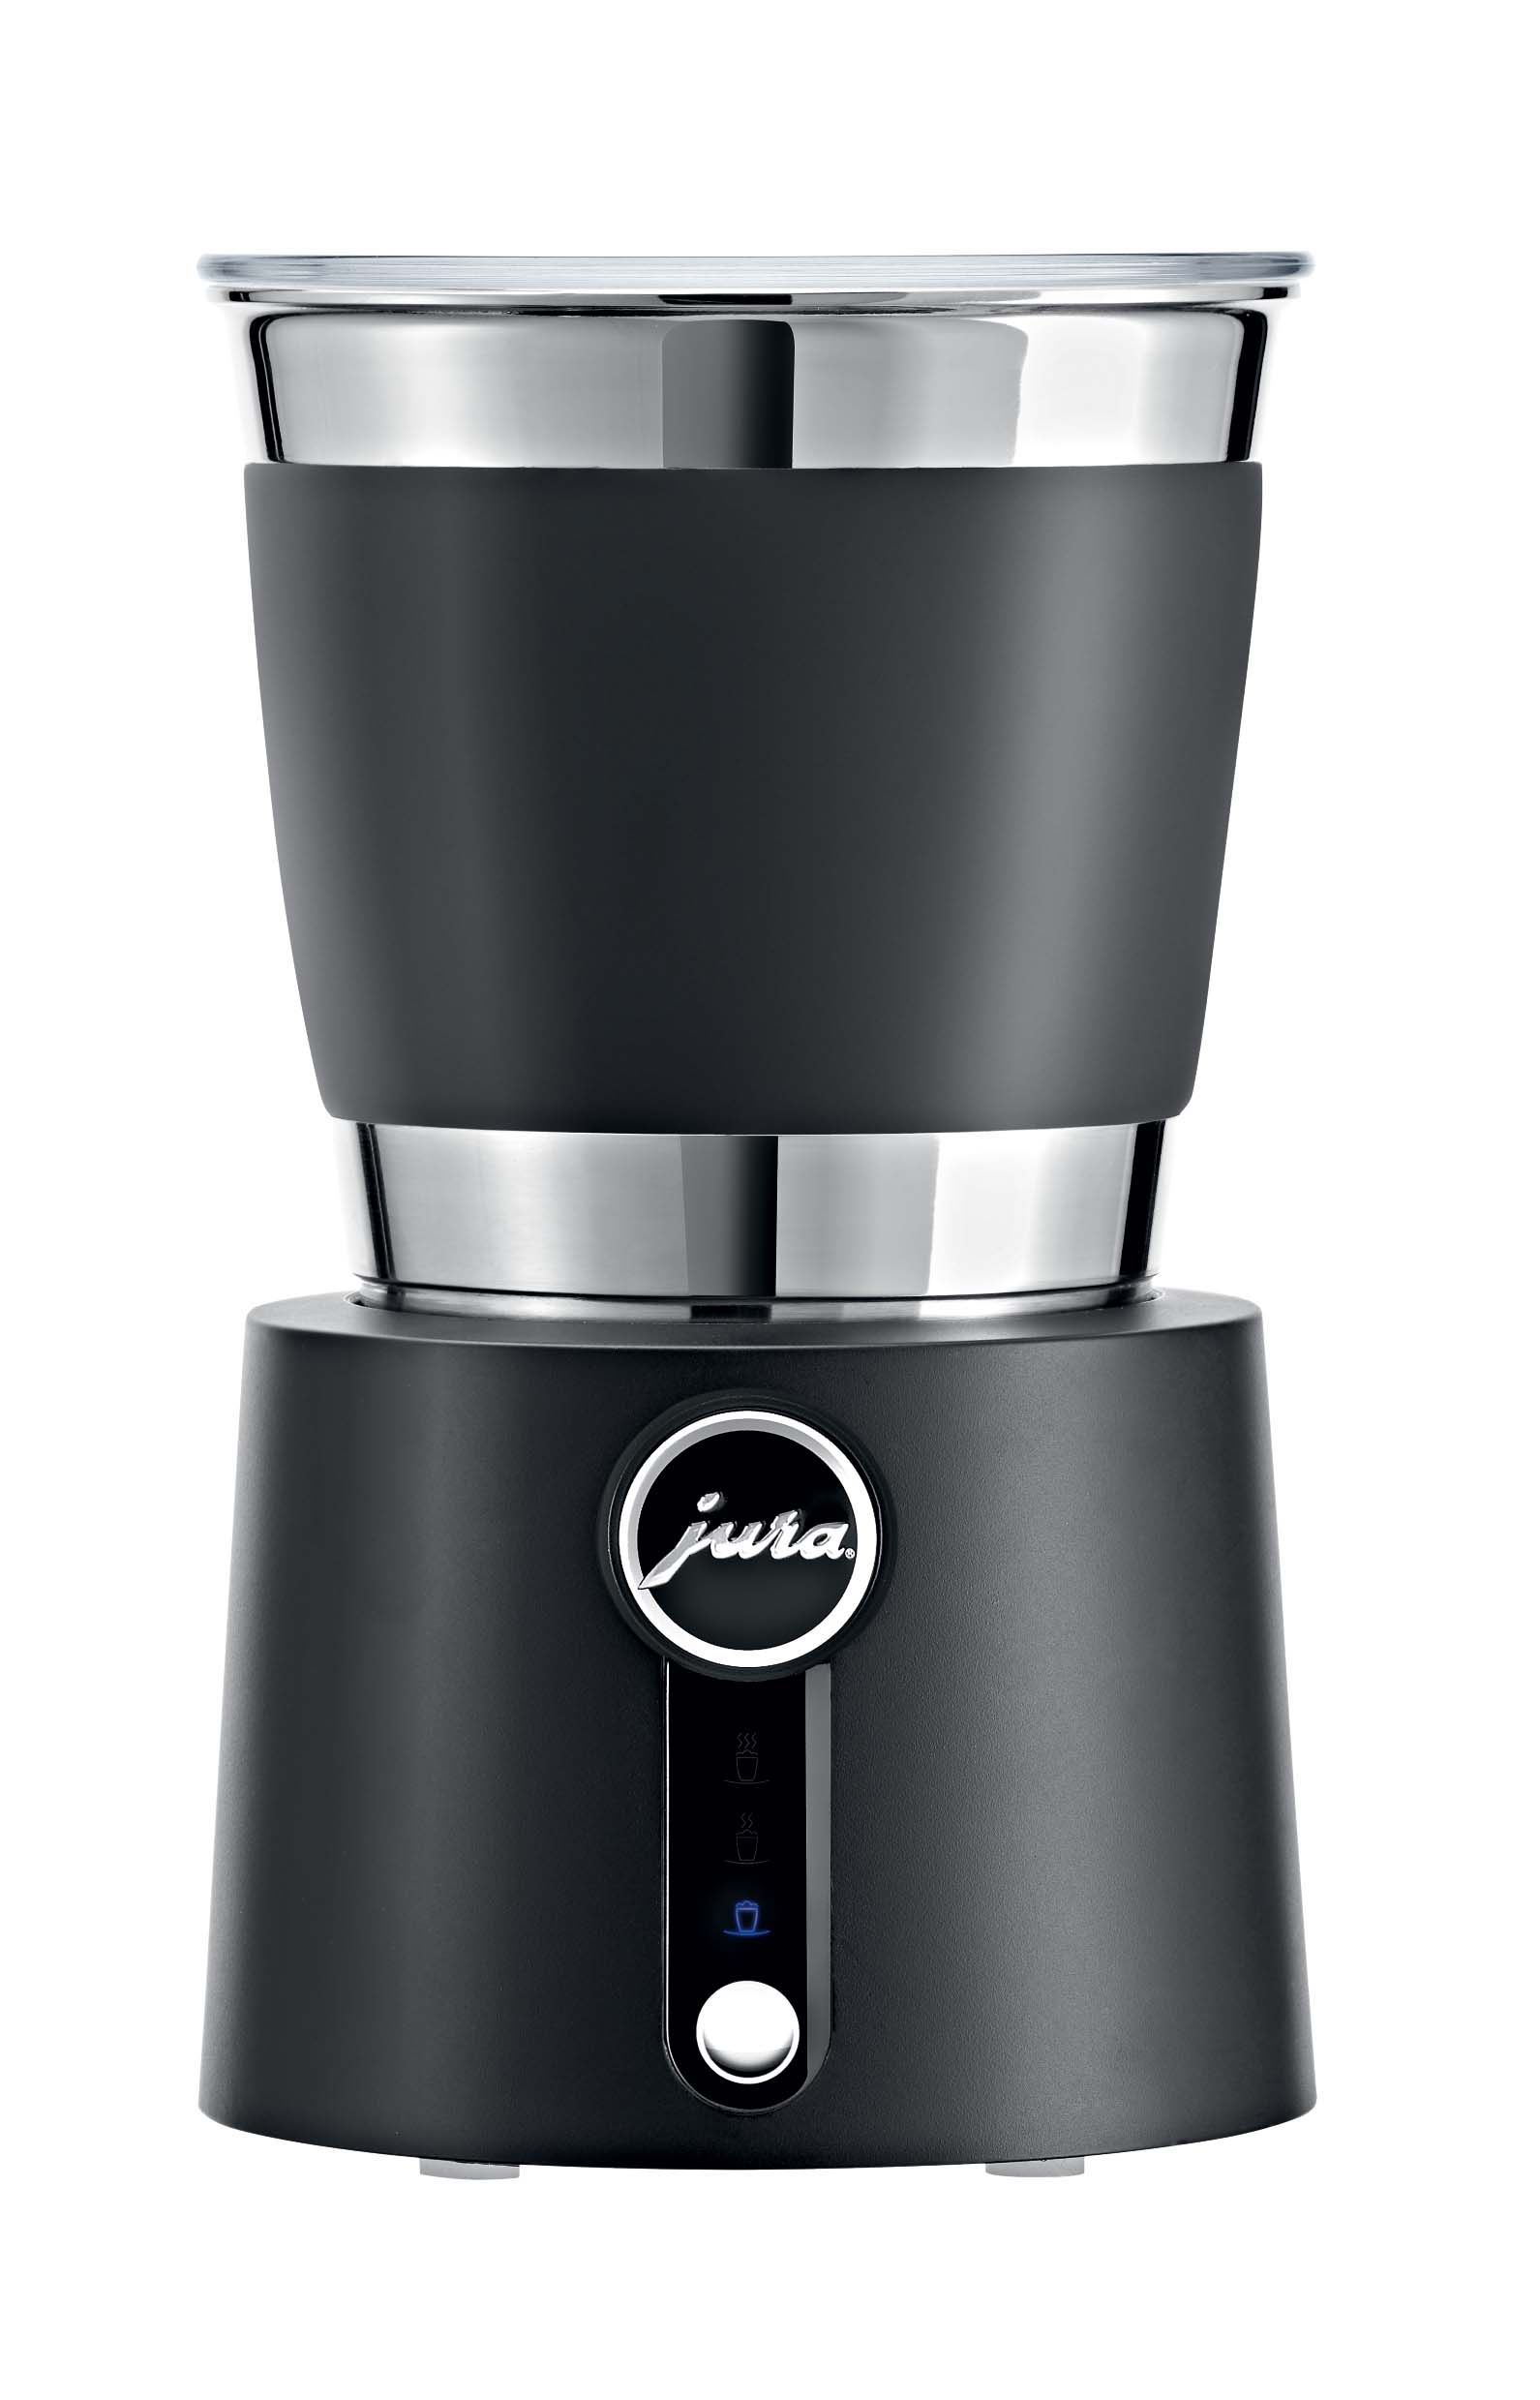 Milk Frother Hot and Cold Jura